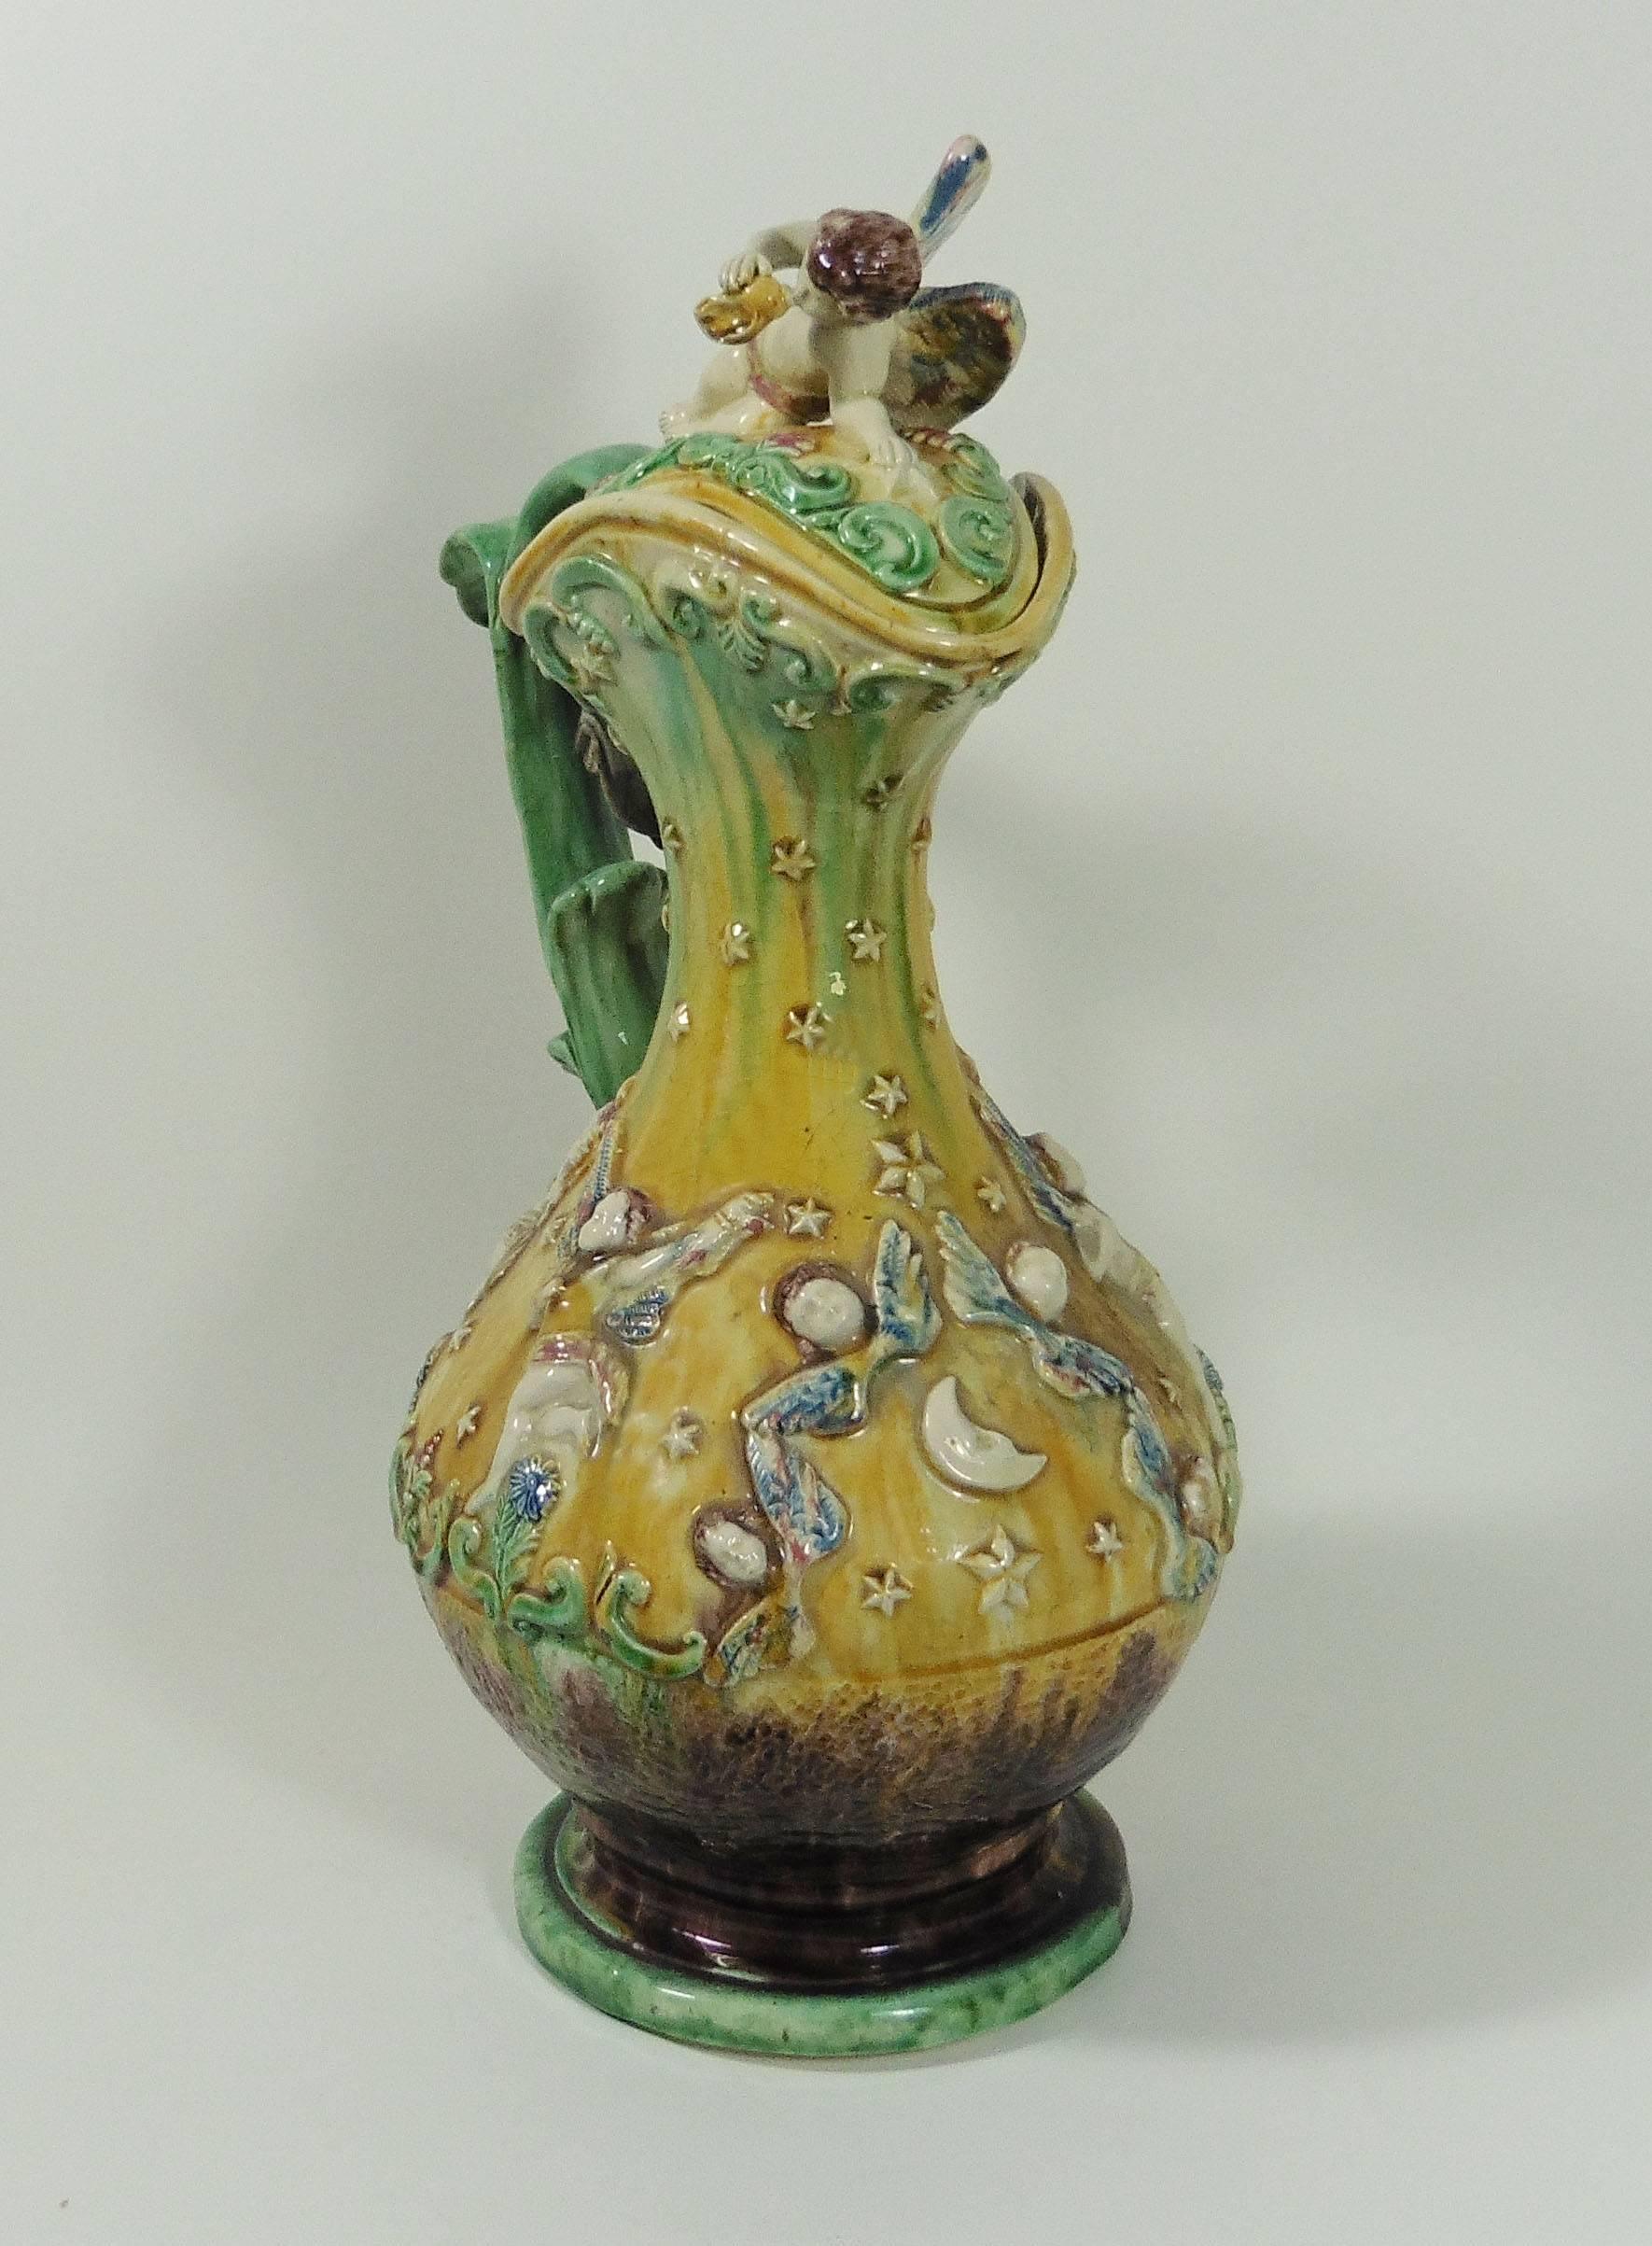 Large 19th Portuguese Palissy lidded ewer with angels, stars, moon, the lid is a large angel with a conch signed Manuel Mafra Caldas da Rainha.
The handle is an aquatic mythical creature.